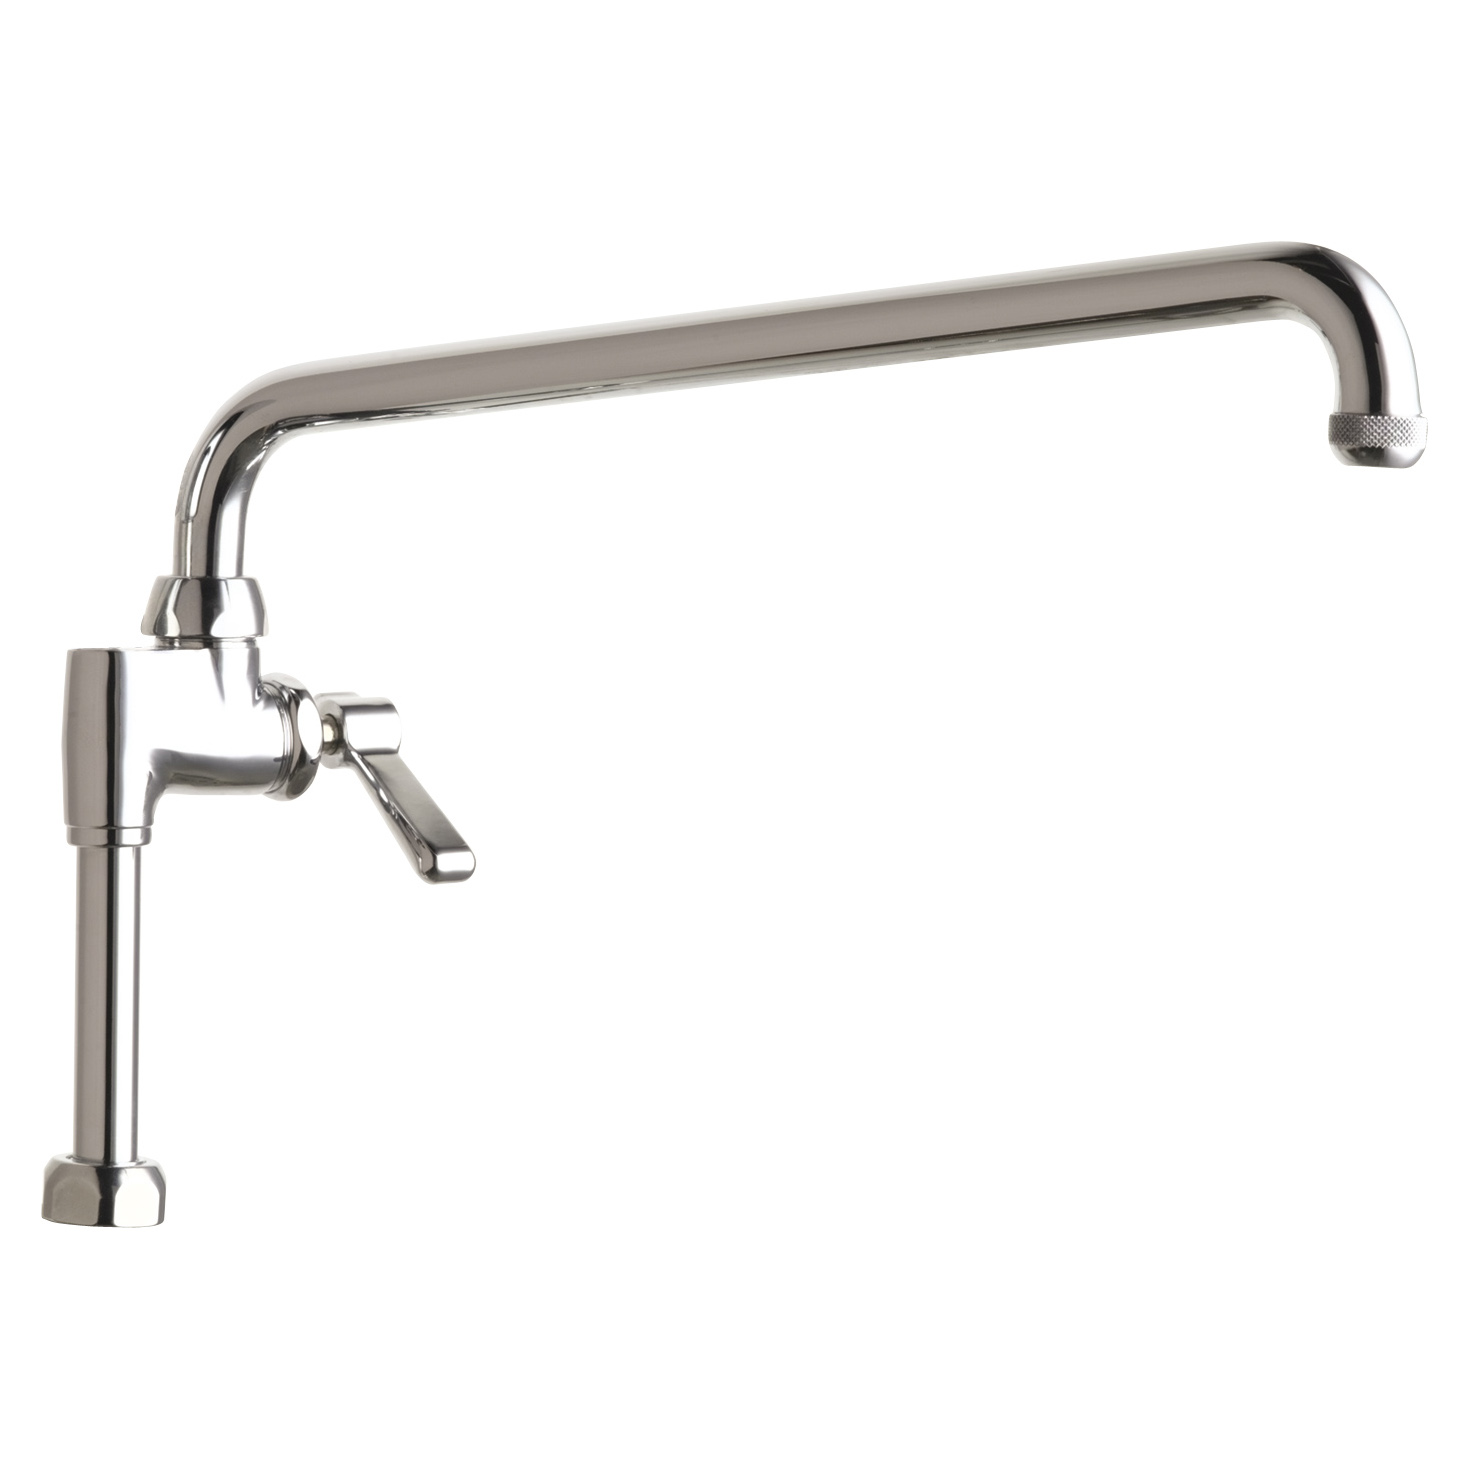 Adapta-Faucet Kitchen Integrated Faucet for Pre-Rinse Fittings Single Hole Full Flow in Chrome